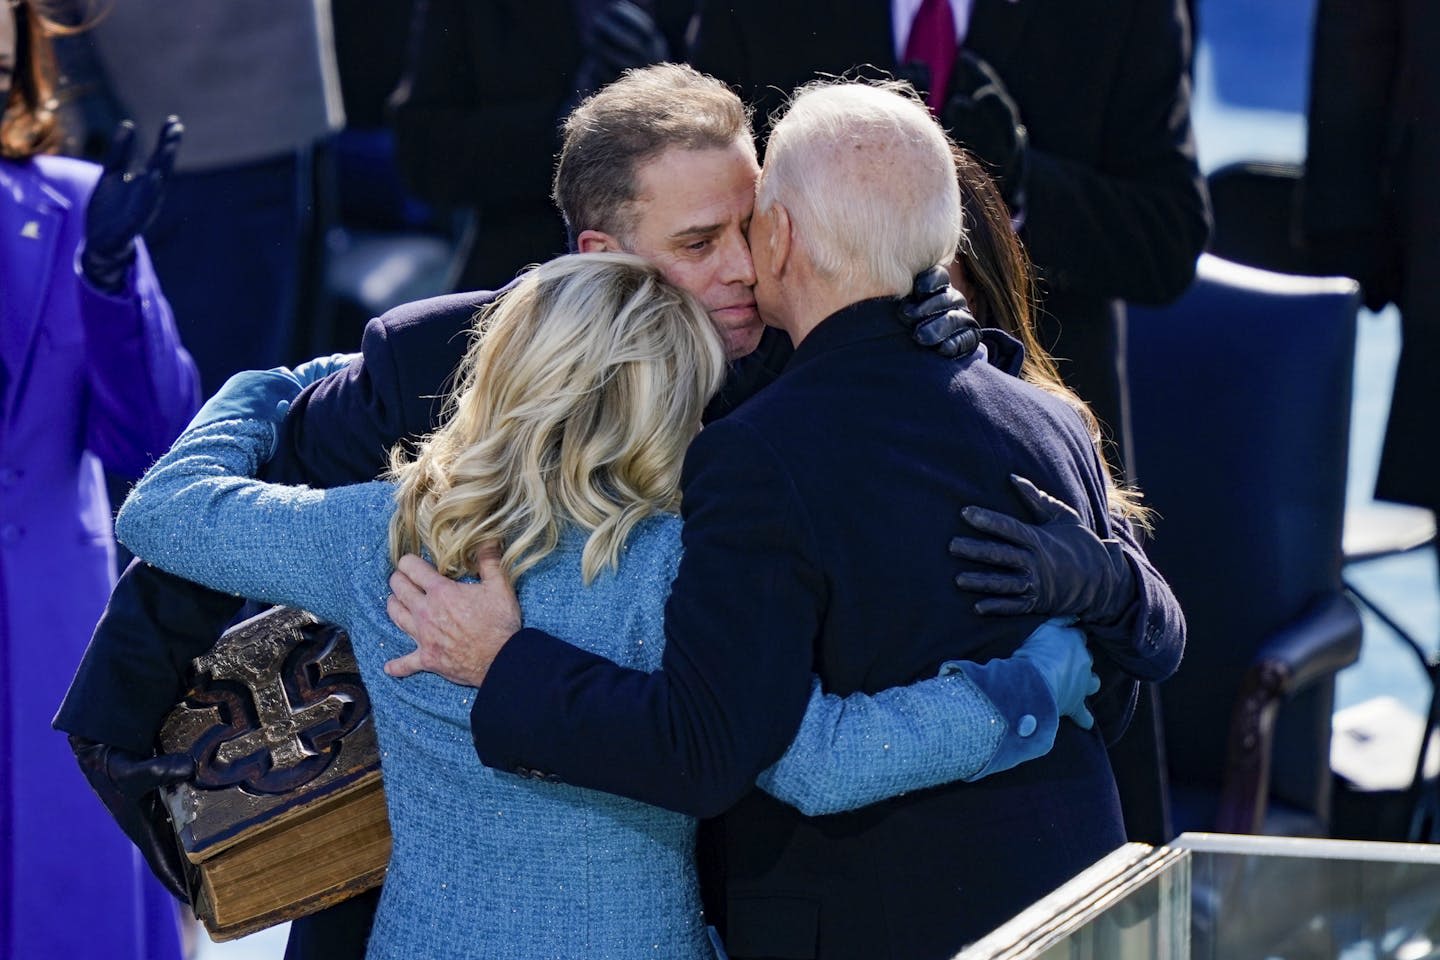 A brief history of tragic presidential relatives, from Alice Roosevelt to Hunter Biden